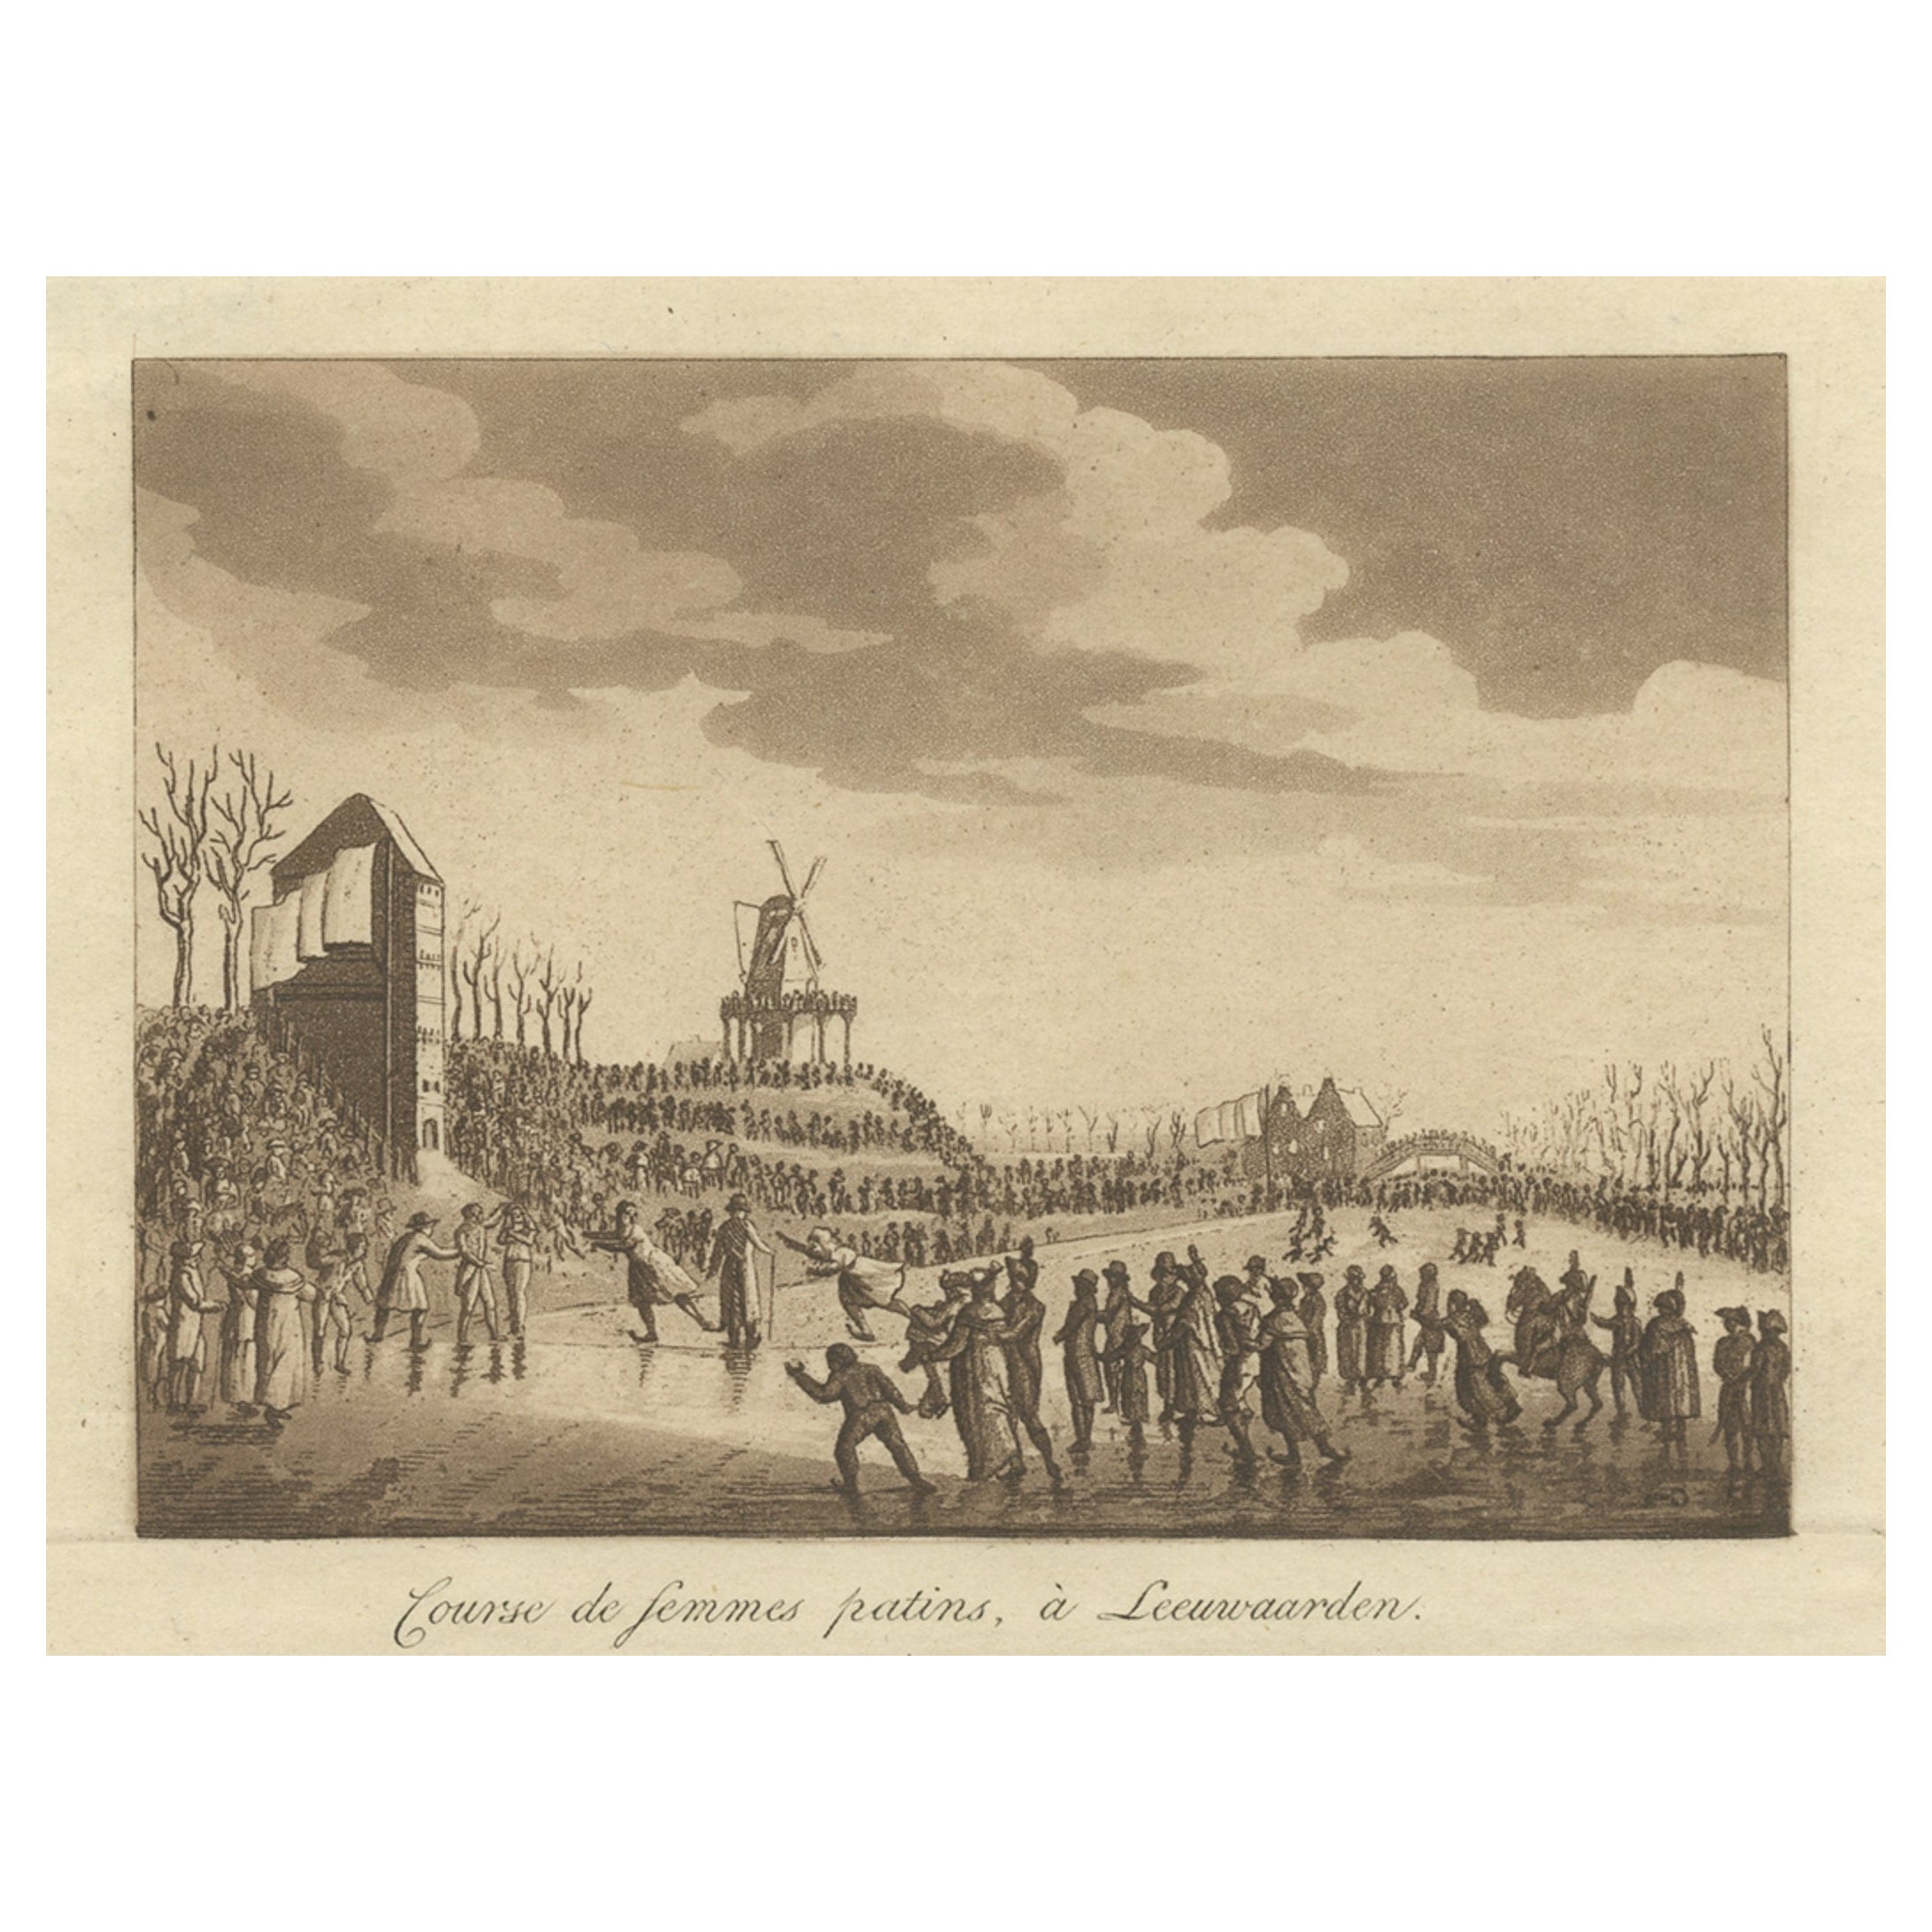 Rare Print of Ice Skating in Leeuwarden, Capital of Friesland, The Netherlands